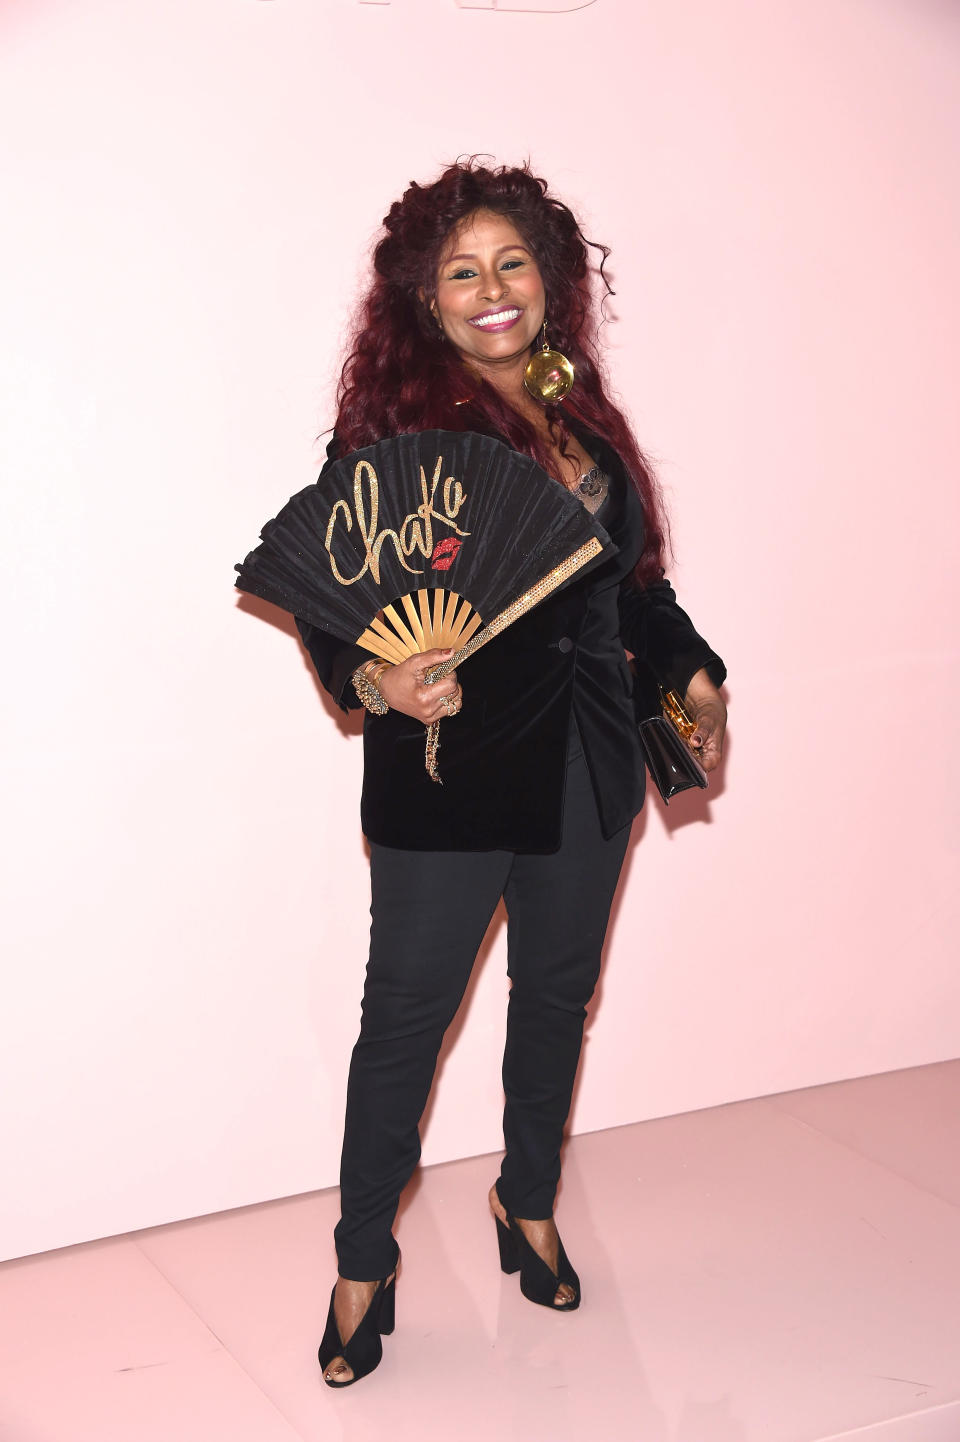 Chaka Khan poses in an all black look and fan decorated with her name at the Tom Ford SS18 show. (Photo: Getty)